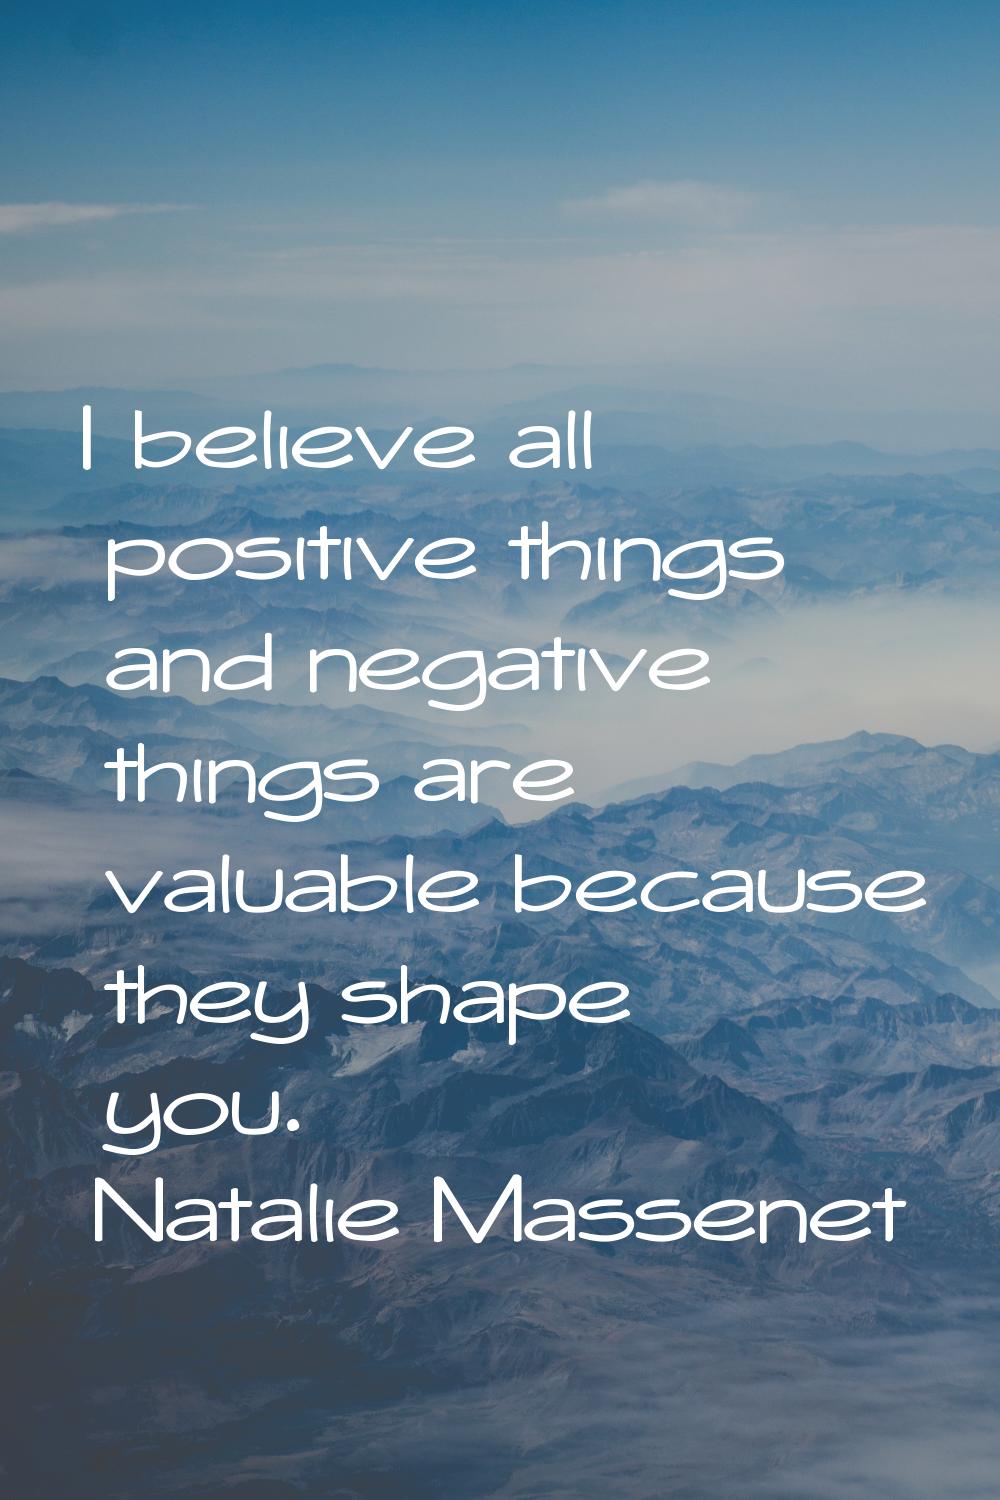 I believe all positive things and negative things are valuable because they shape you.